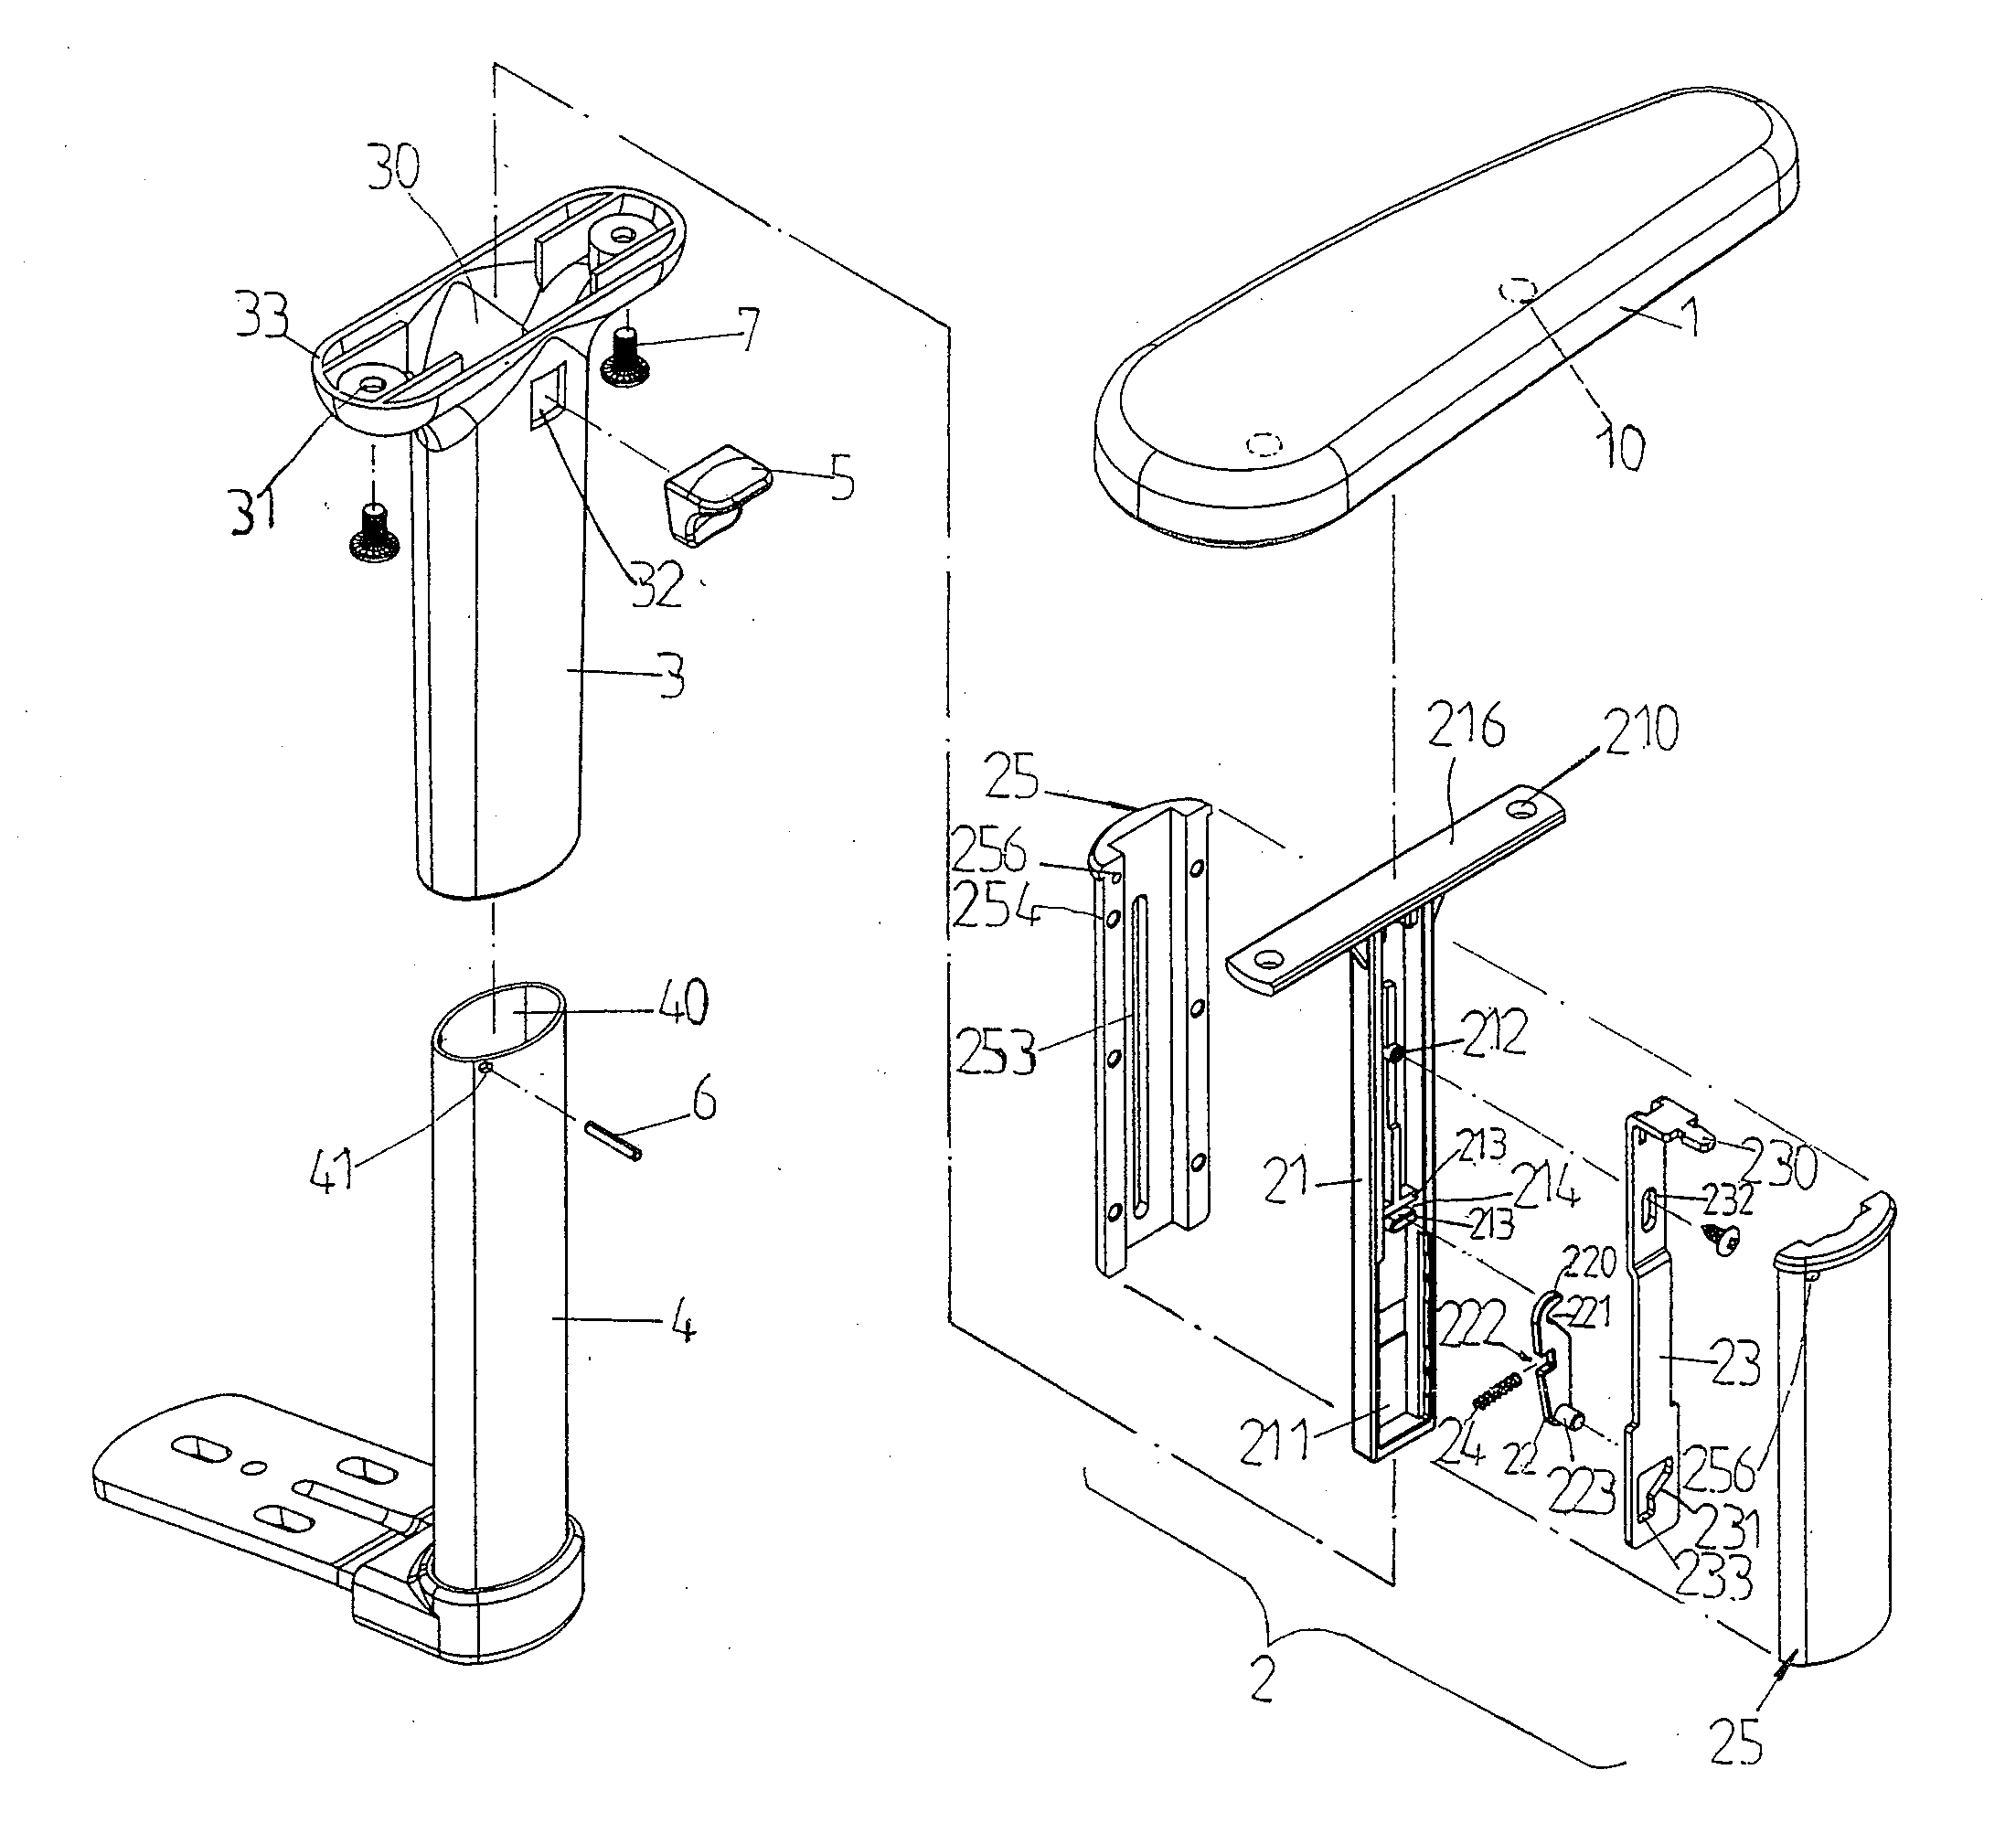 Chair Armrest Assembly Having Adjustable Height